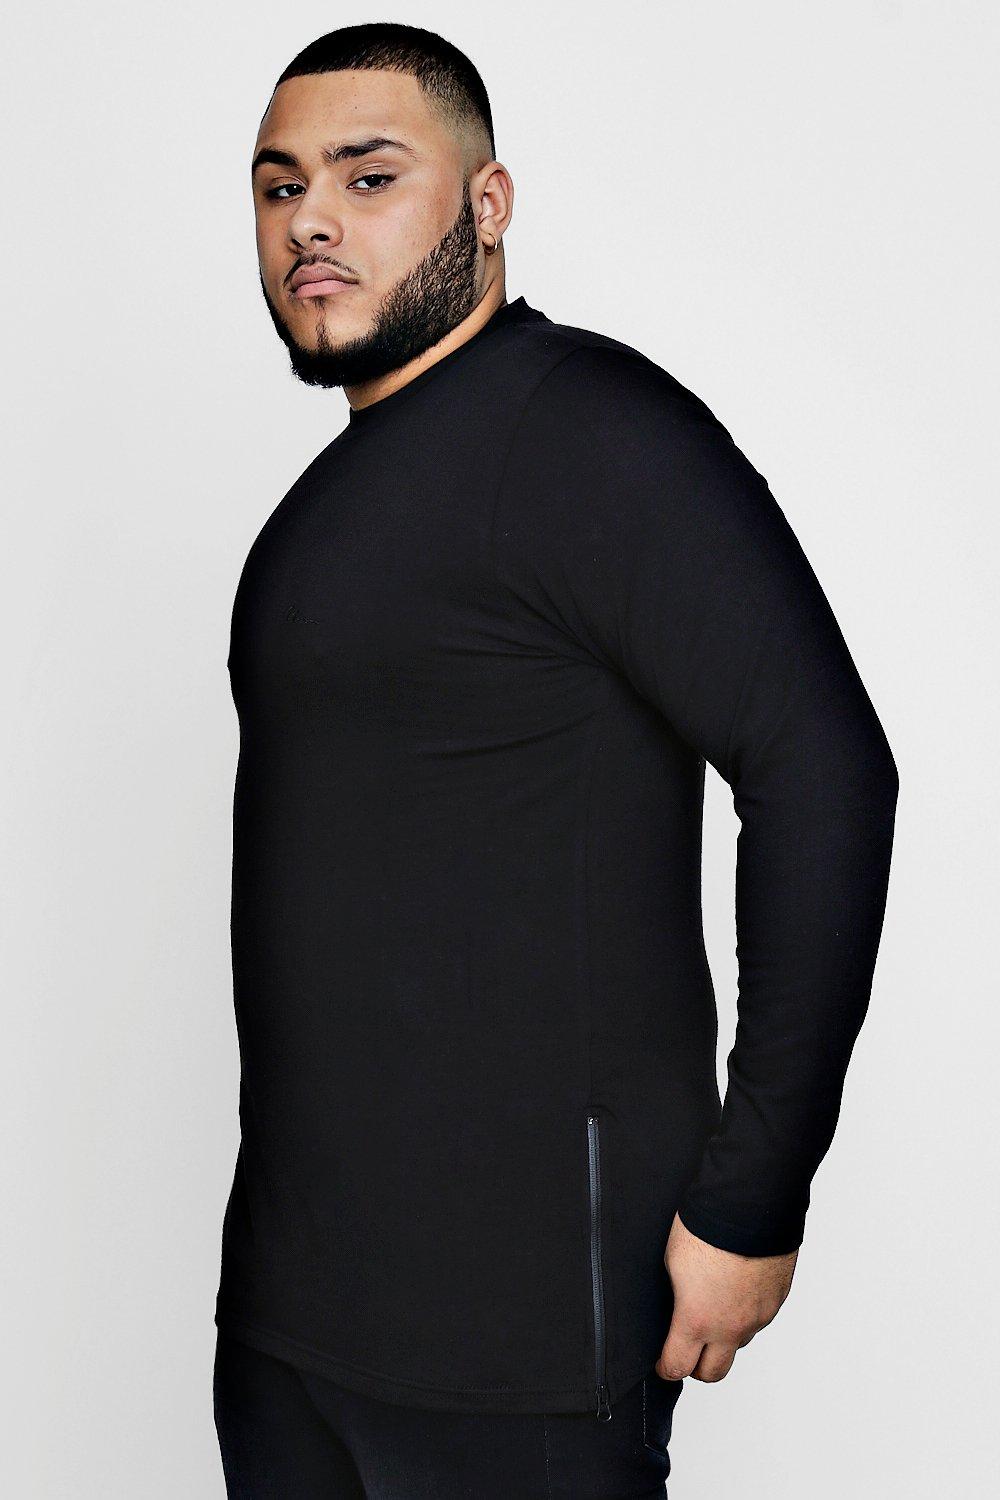 slim fit shirt for fat guys